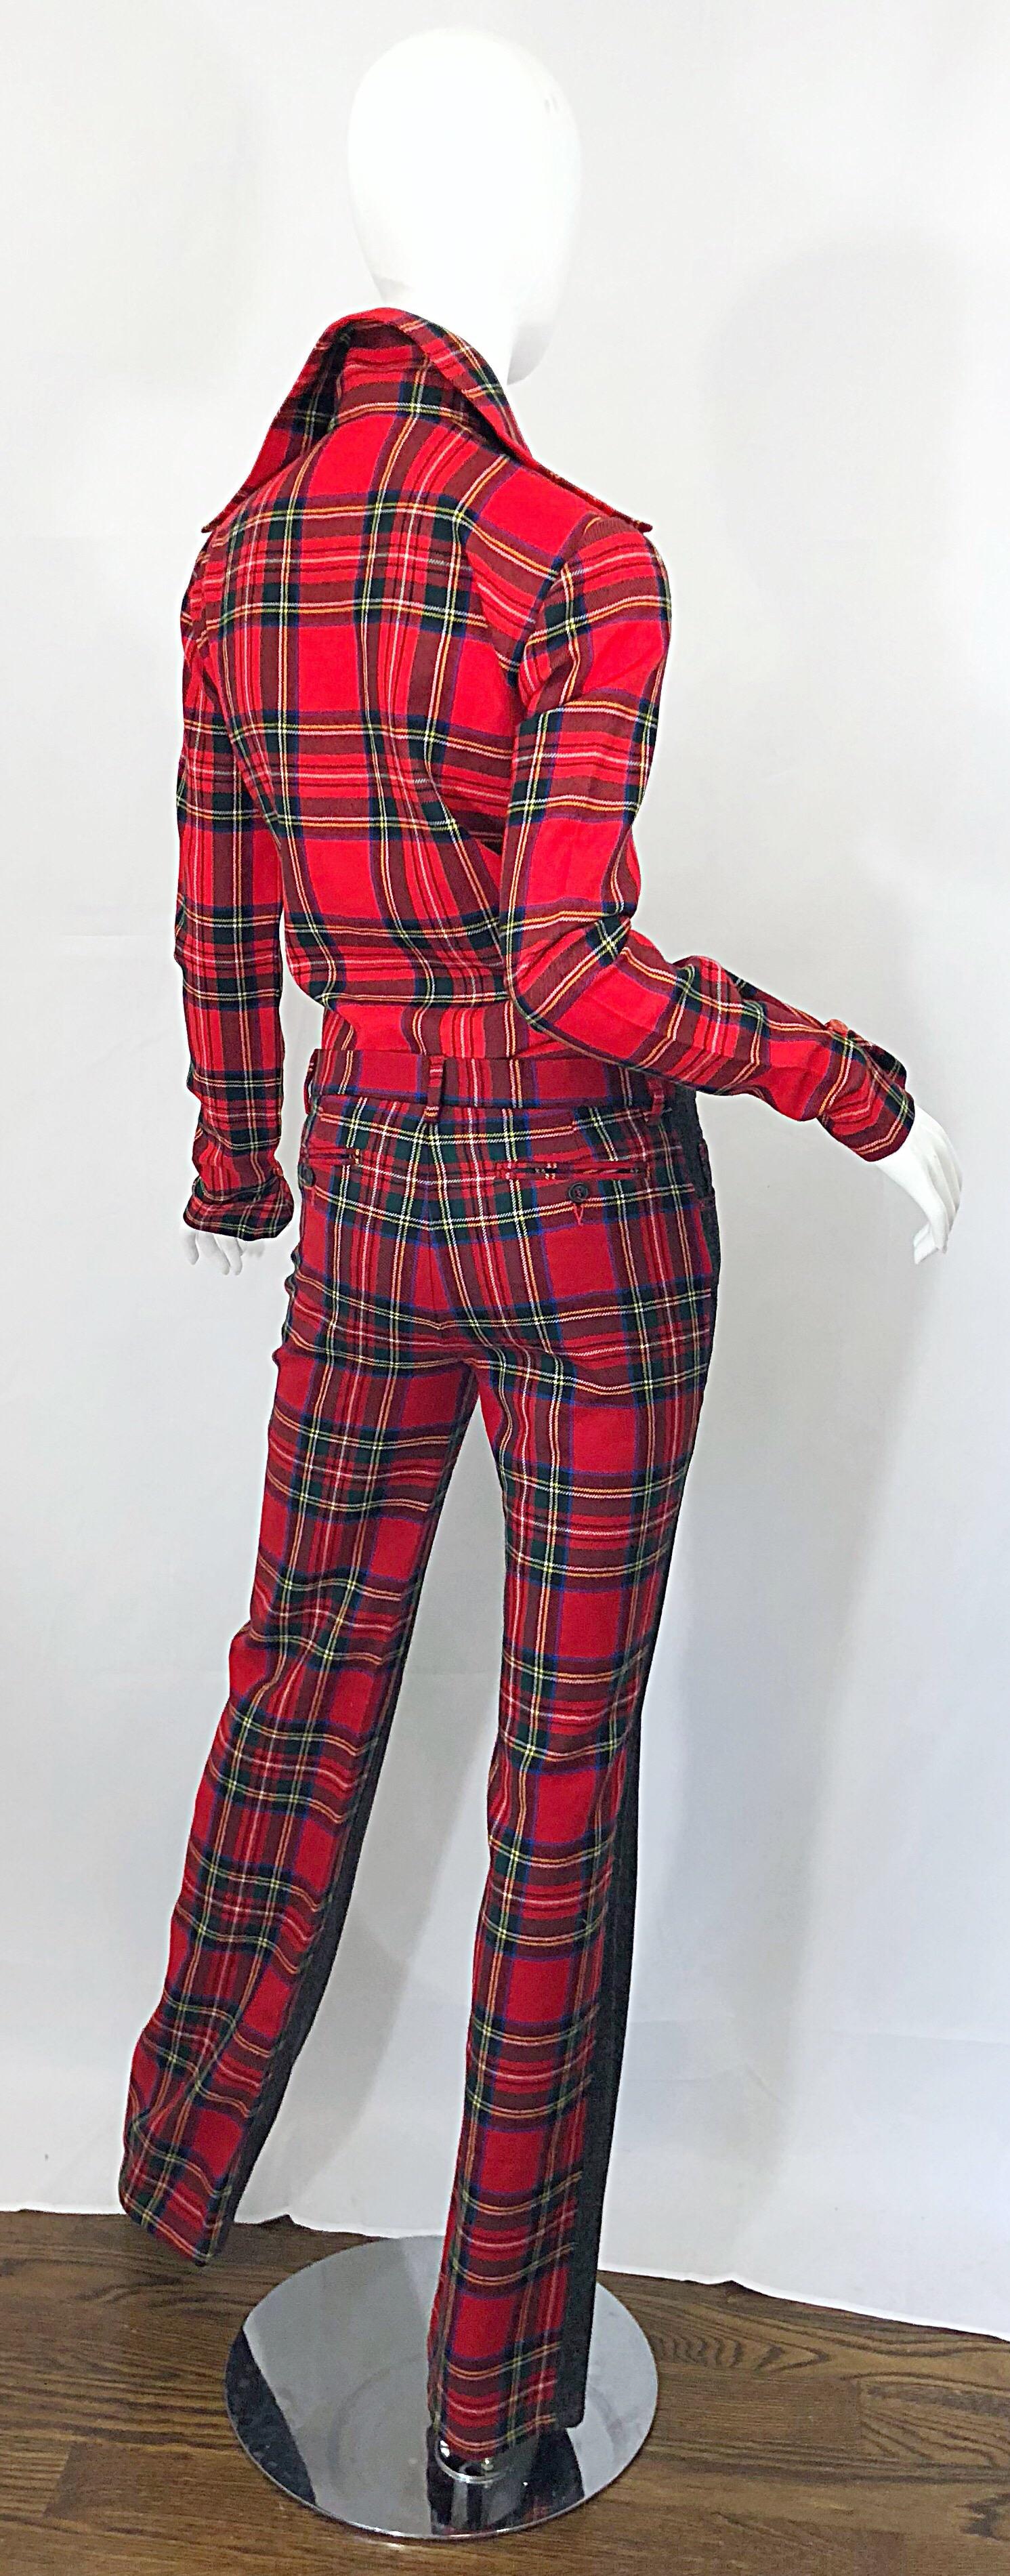 Rare 1990s Dolce & Gabbana Red Tartan Plaid Wool + Denim Flared Jeans and Shirt For Sale 1